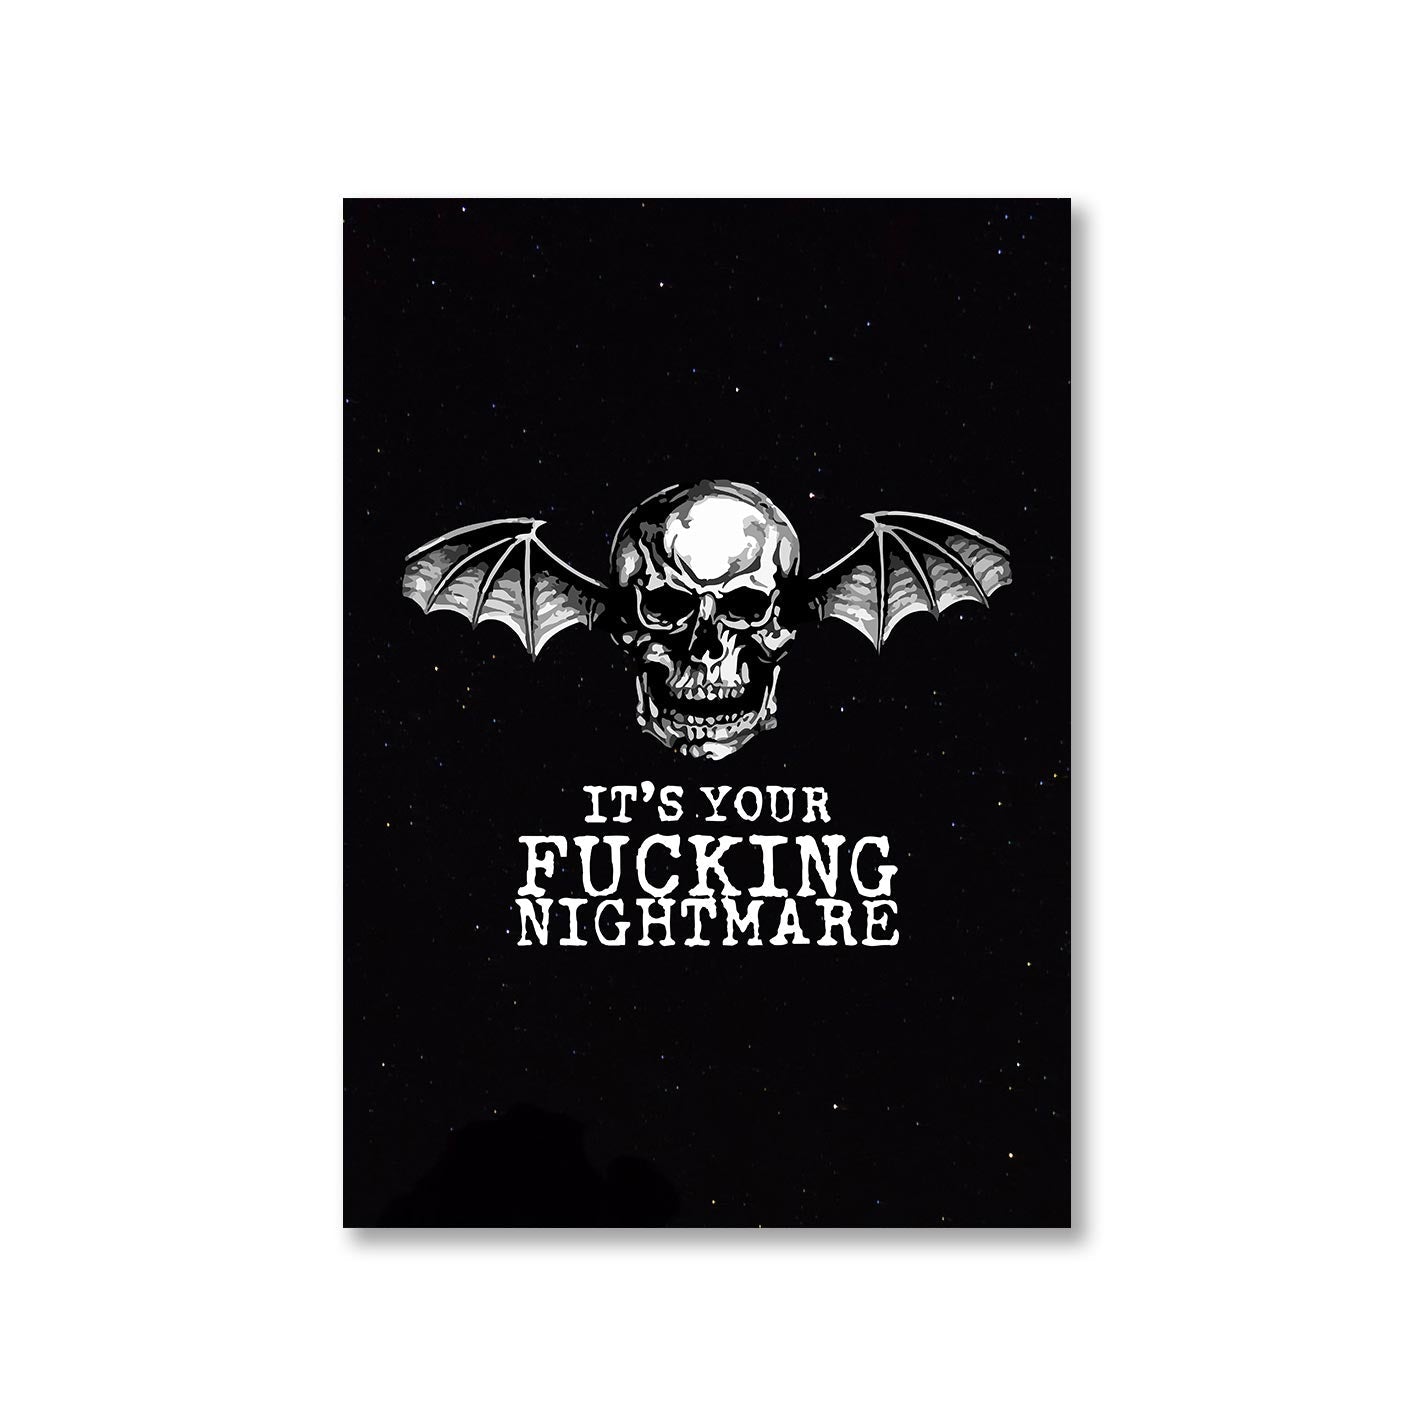 avenged sevenfold nightmare poster wall art buy online india the banyan tee tbt a4